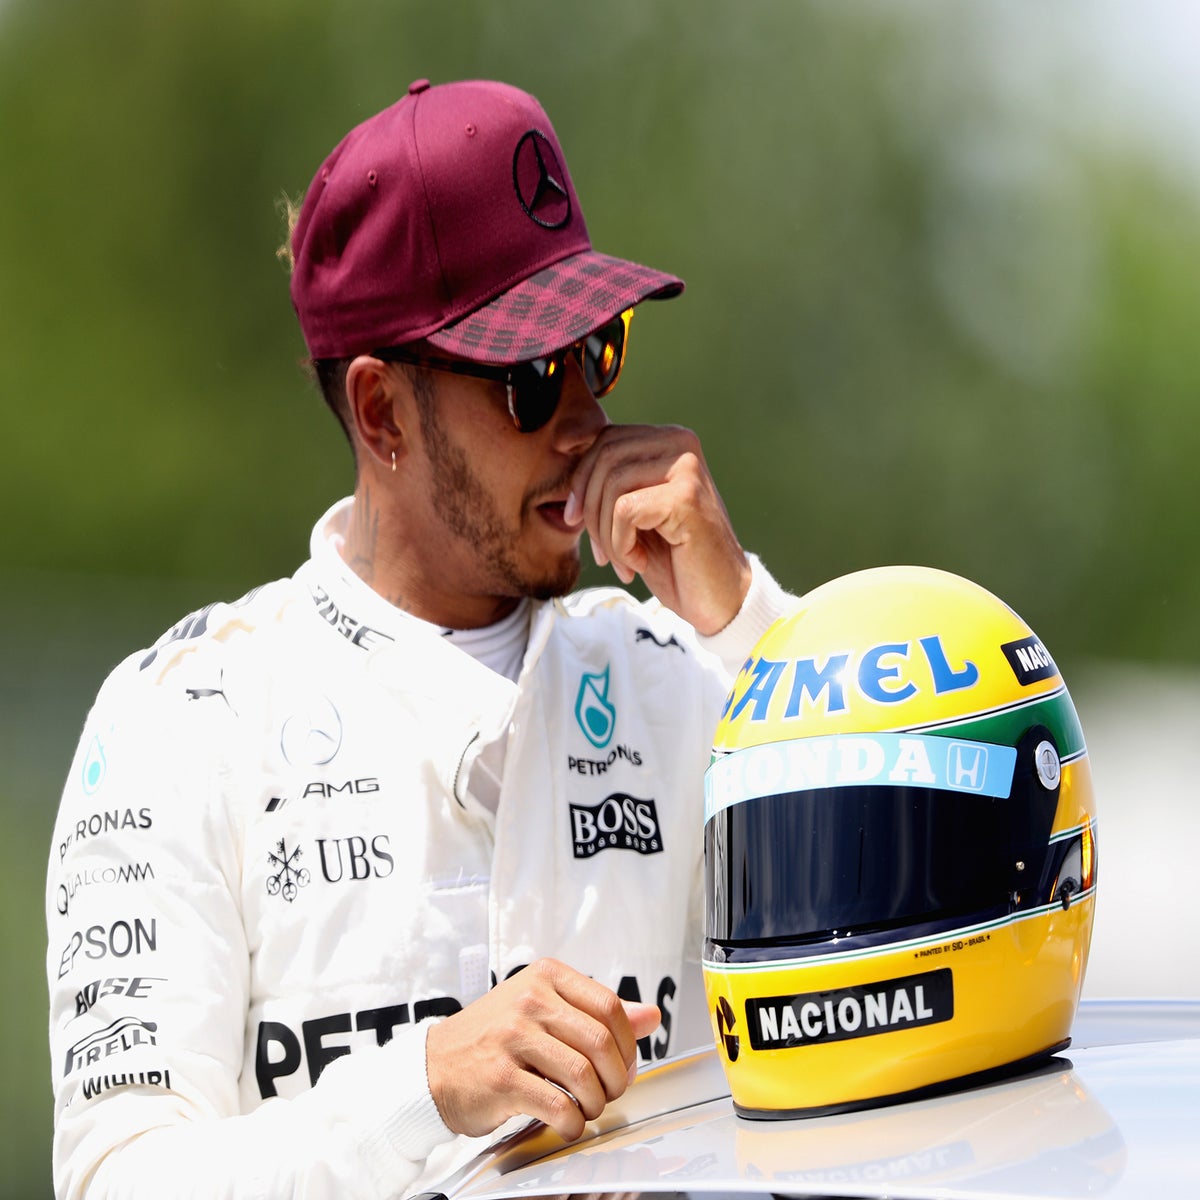 Lewis Hamilton suffered from horrible situation as Ayrton Senna